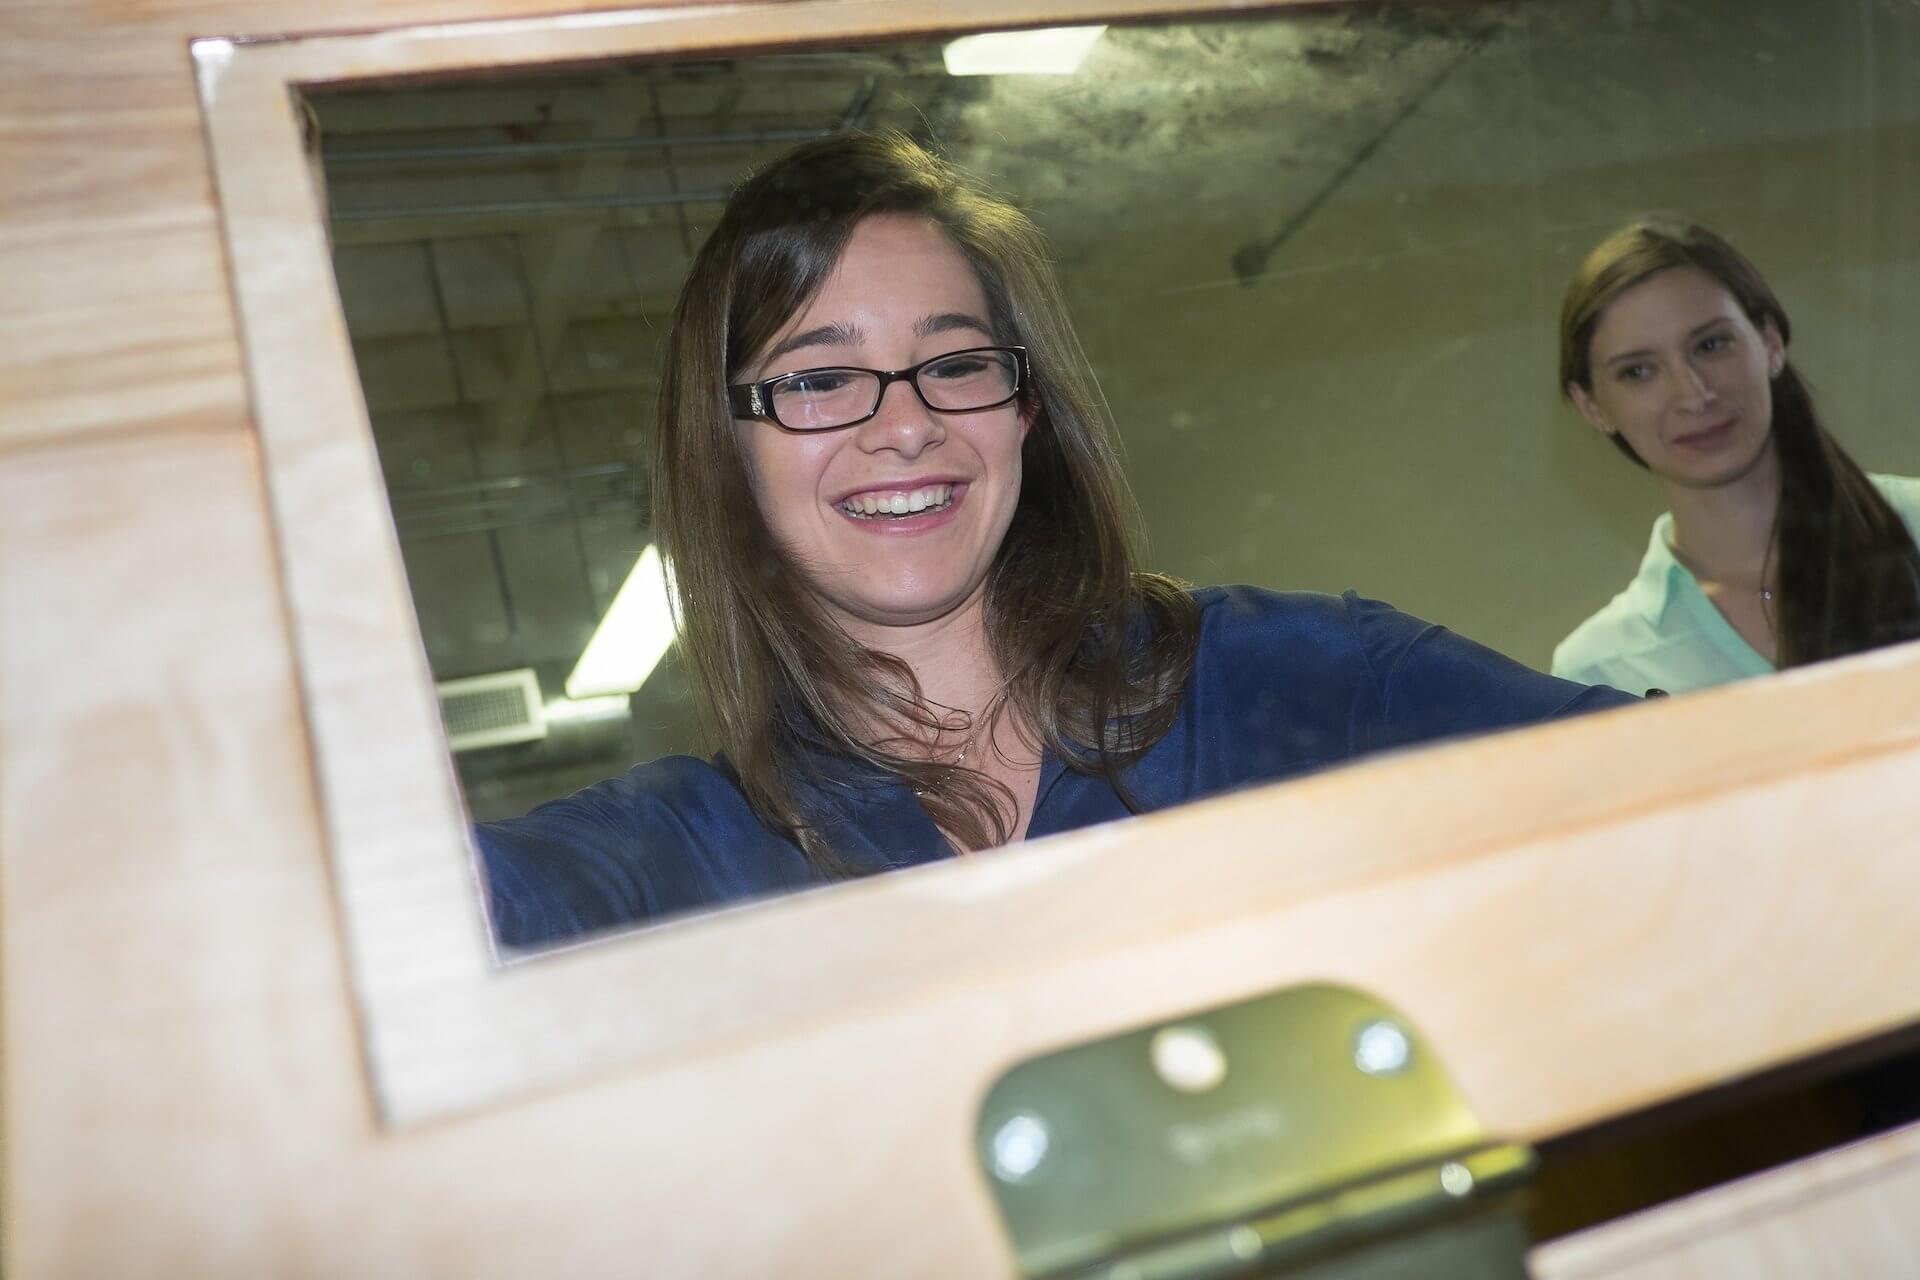 Rice University students Amanda Boone, left, and Carissa Livingston peer through the window of their senior engineering team's incubator which they designed to help newborns in developing countries recover from neonatal hypothermia. (Credit: Jeff Fitlow)